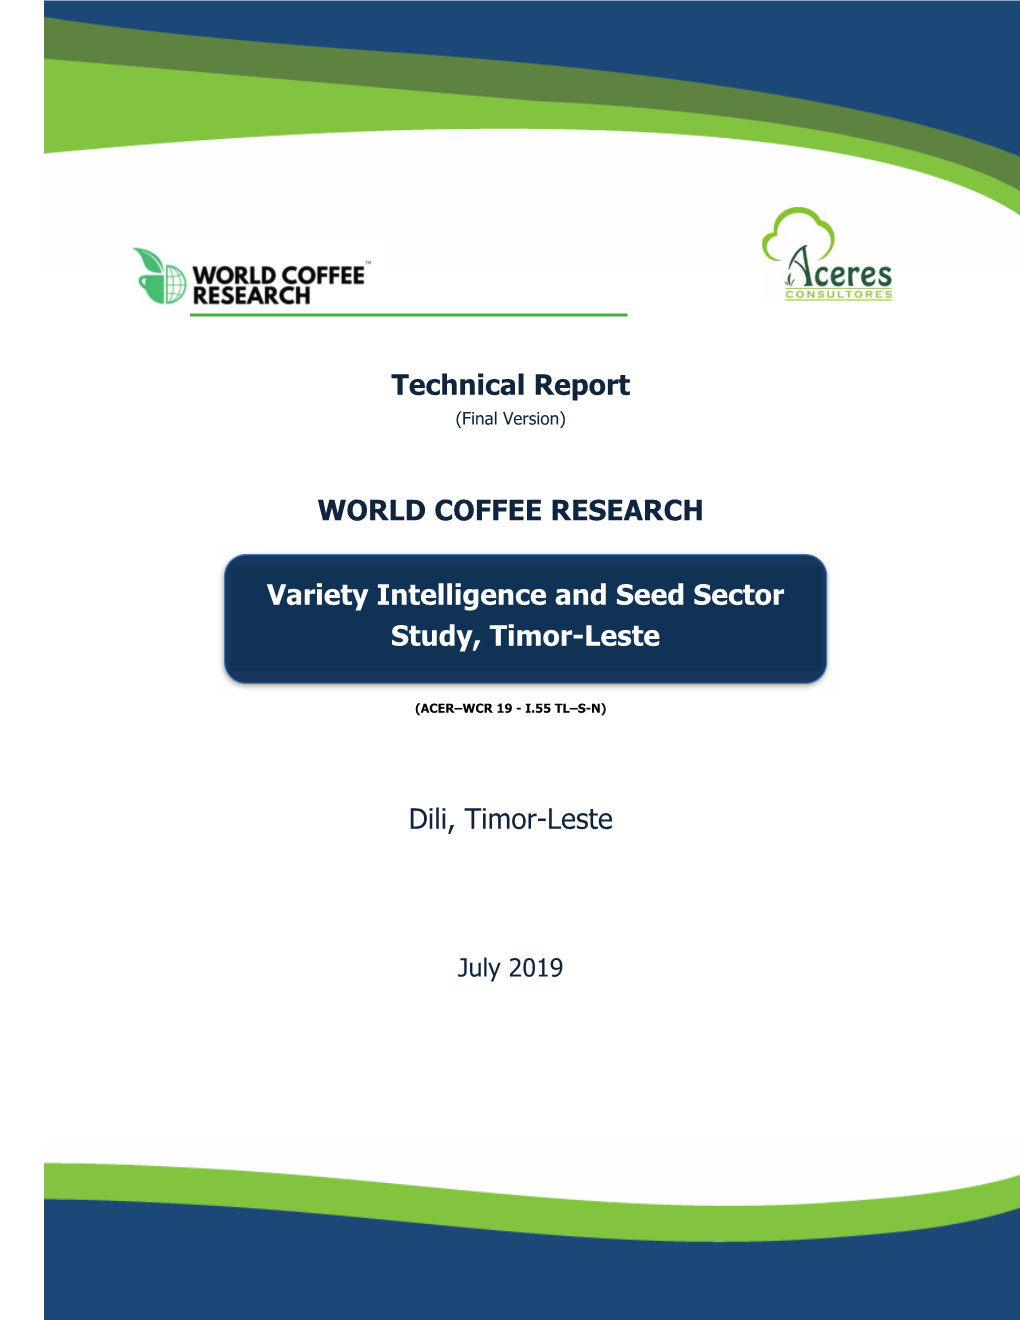 Variety Intelligence and Seed Sector Study, Timor-Leste-WCR